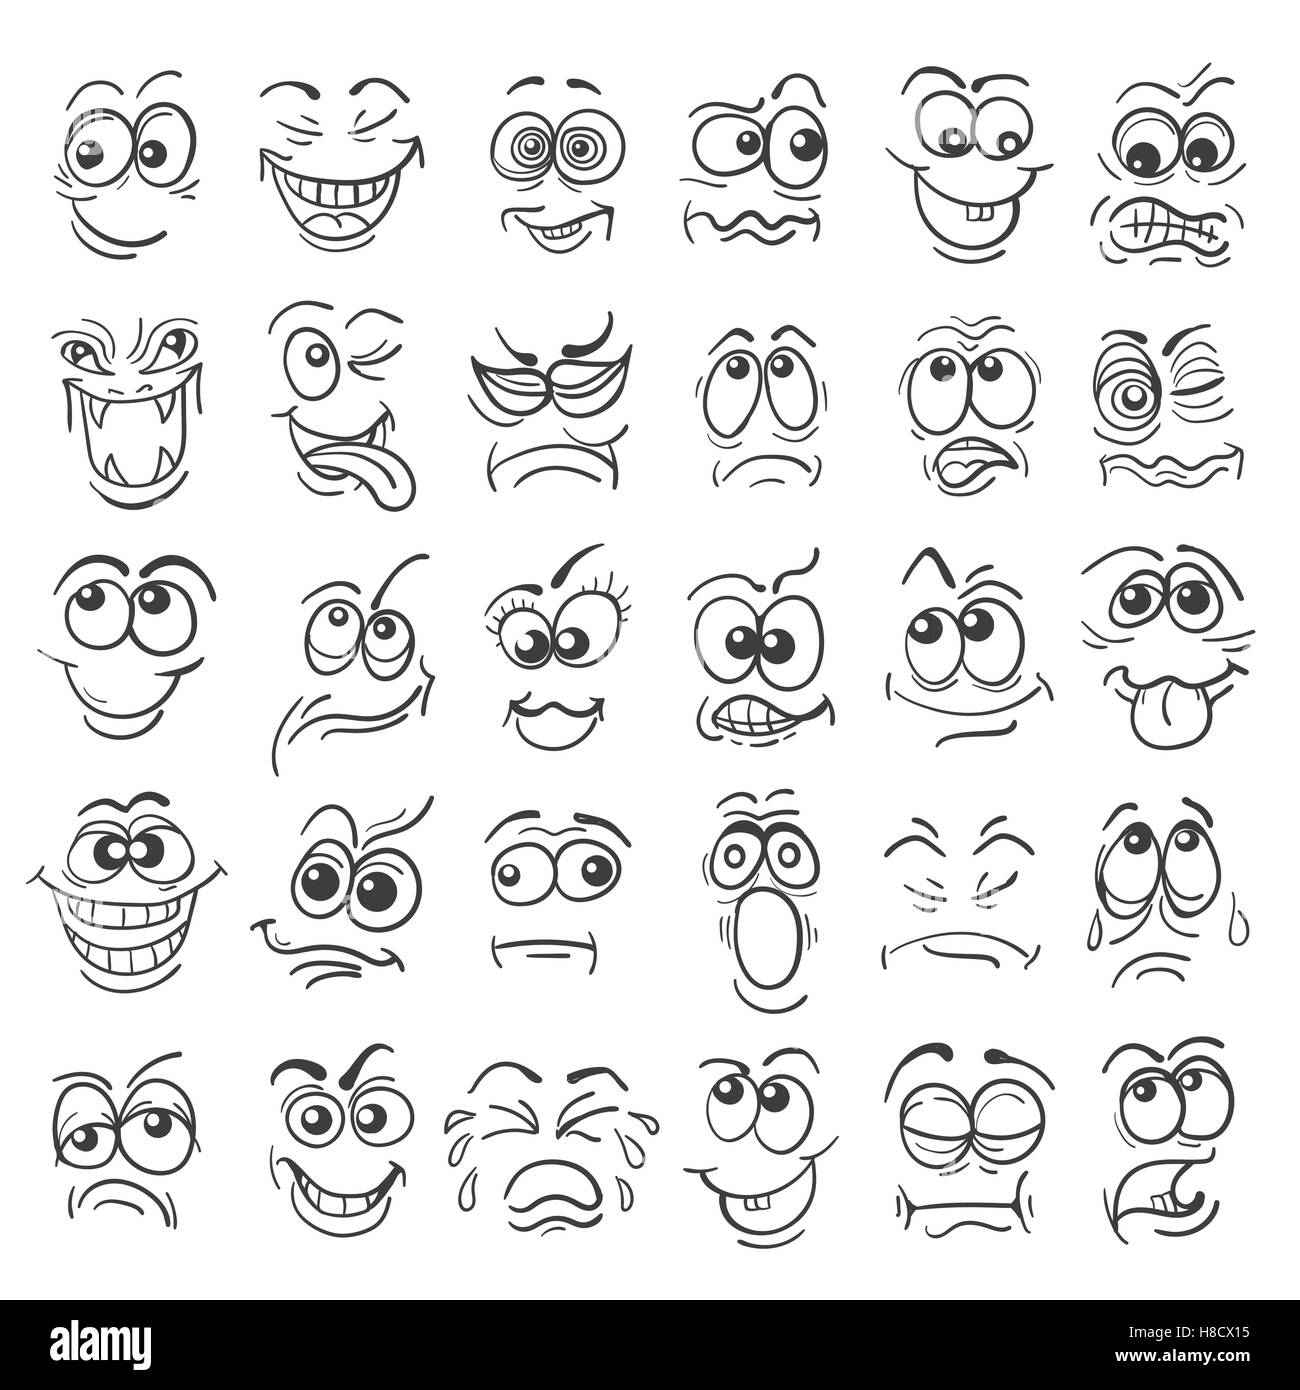 Cartoon face Emotion set. Various facial expressions in doodle style isolated on white. Vector illustration. Stock Vector